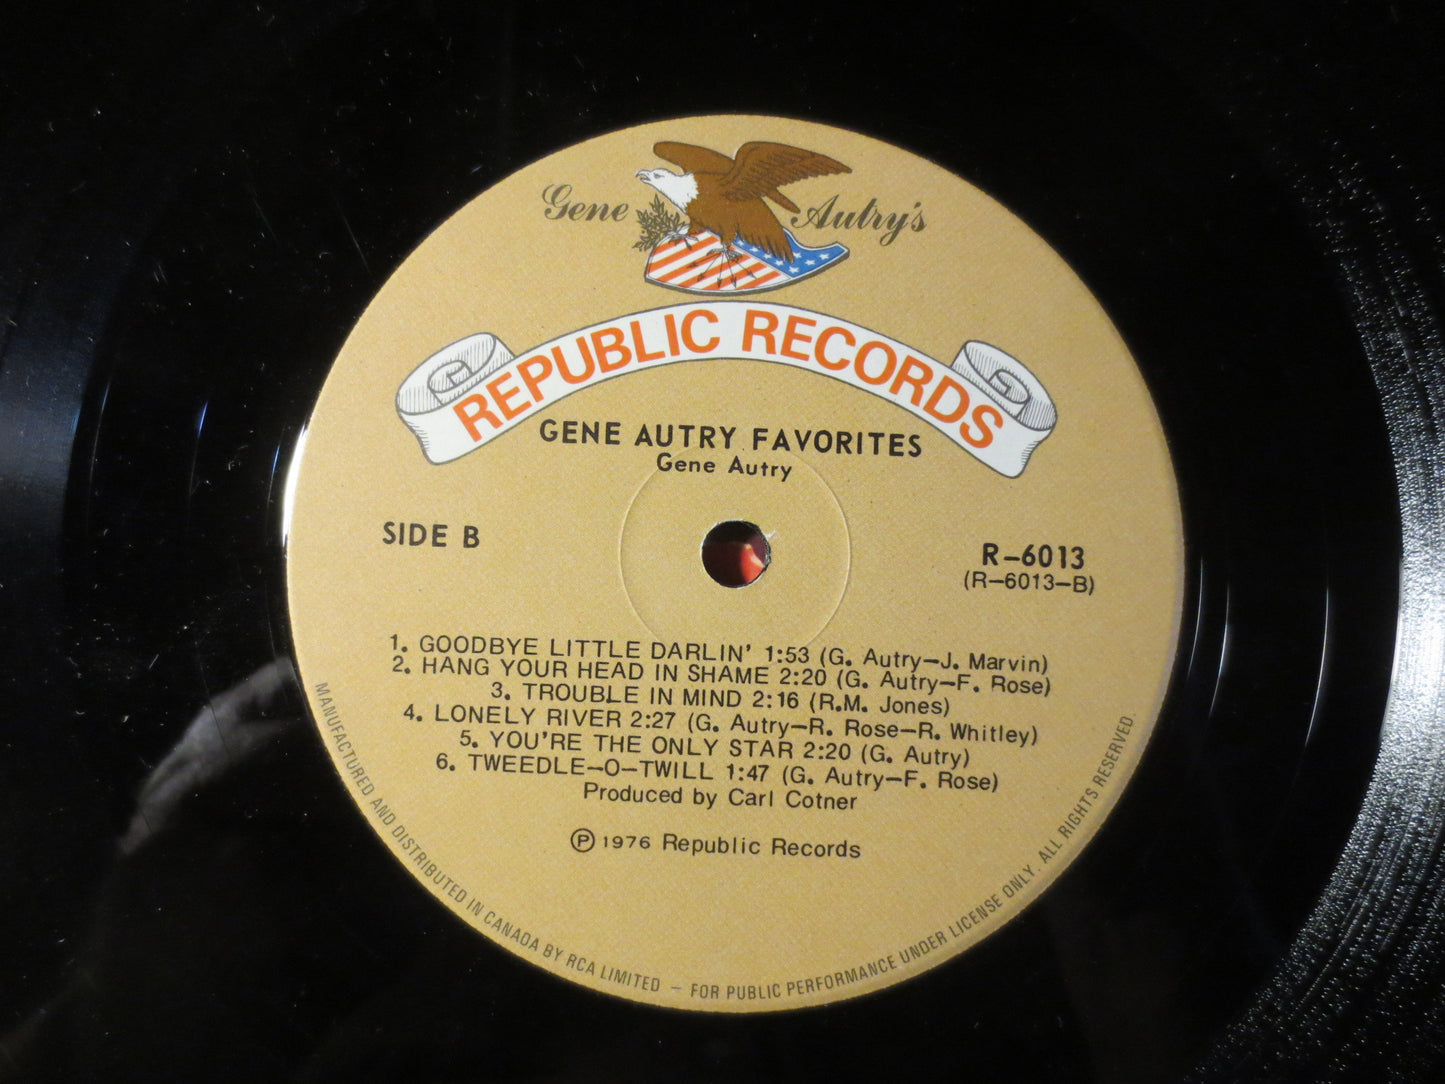 GENE AUTRY, FAVORITES, Country Records, Gene Autry Record, Gene Autry Album Gene Autry Lp, Country Album, Lps, 1976 Records